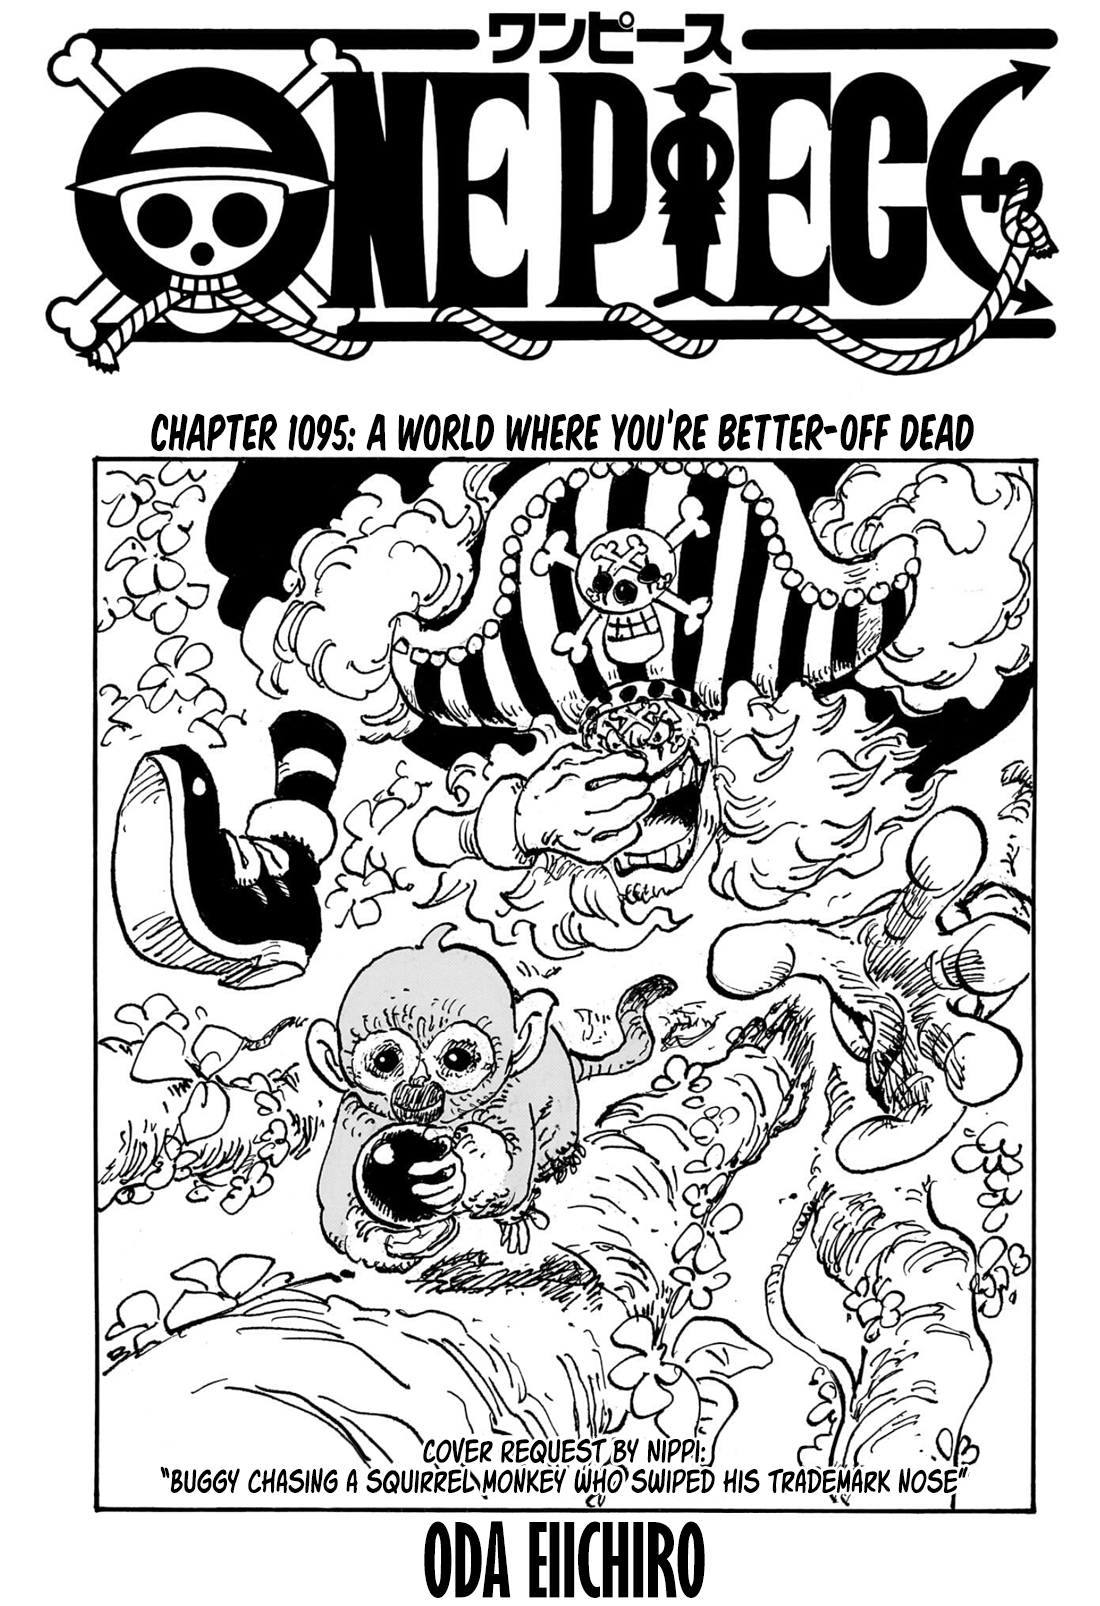 One Piece Chapter 1025 Raw Scans, Spoilers, Release Date - Anime Troop